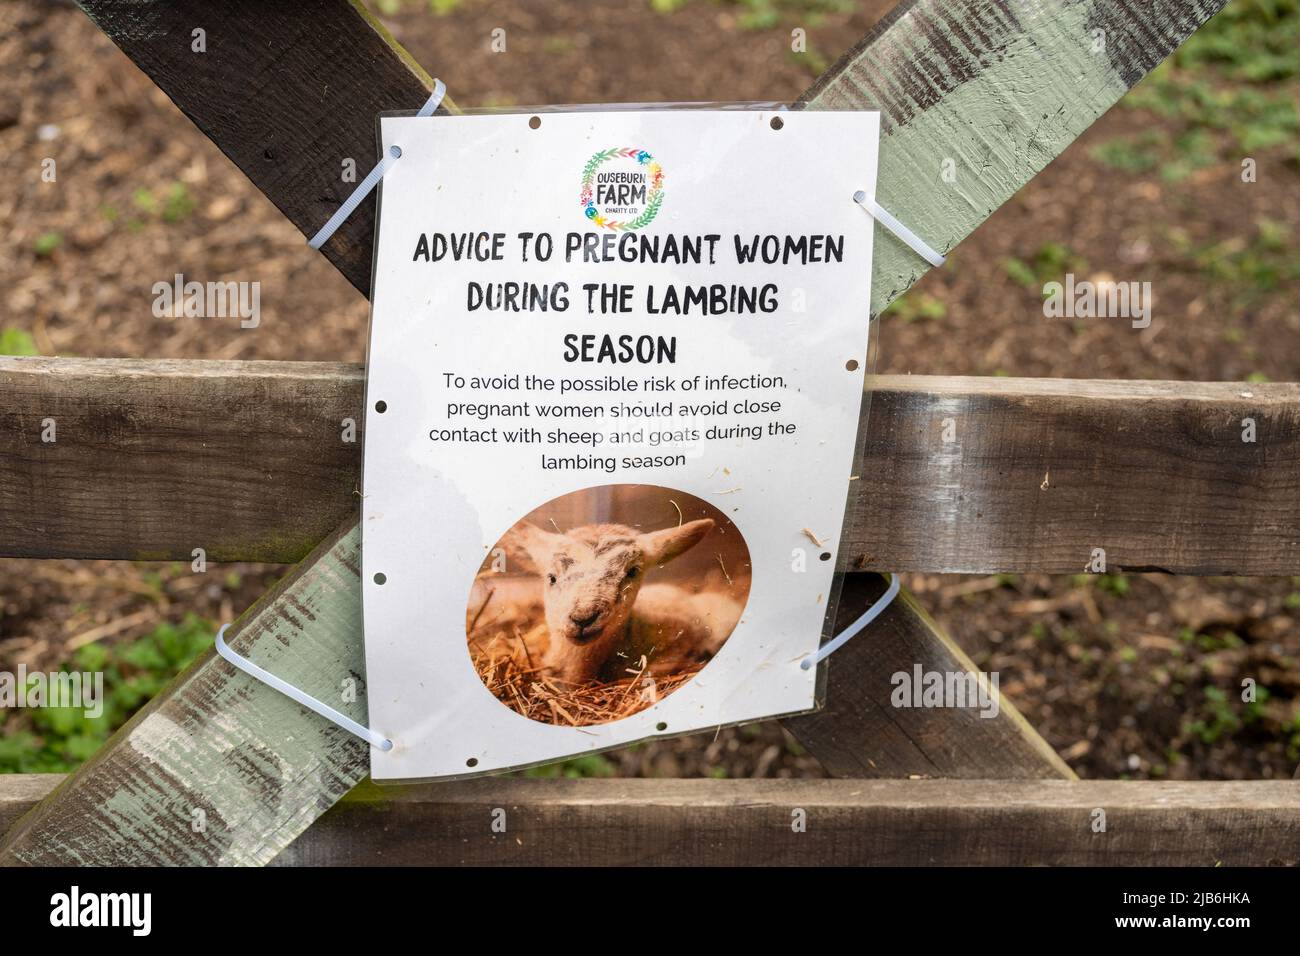 A sign at a farm during lambing season warns people against contact with sheep if they are pregnant. Stock Photo